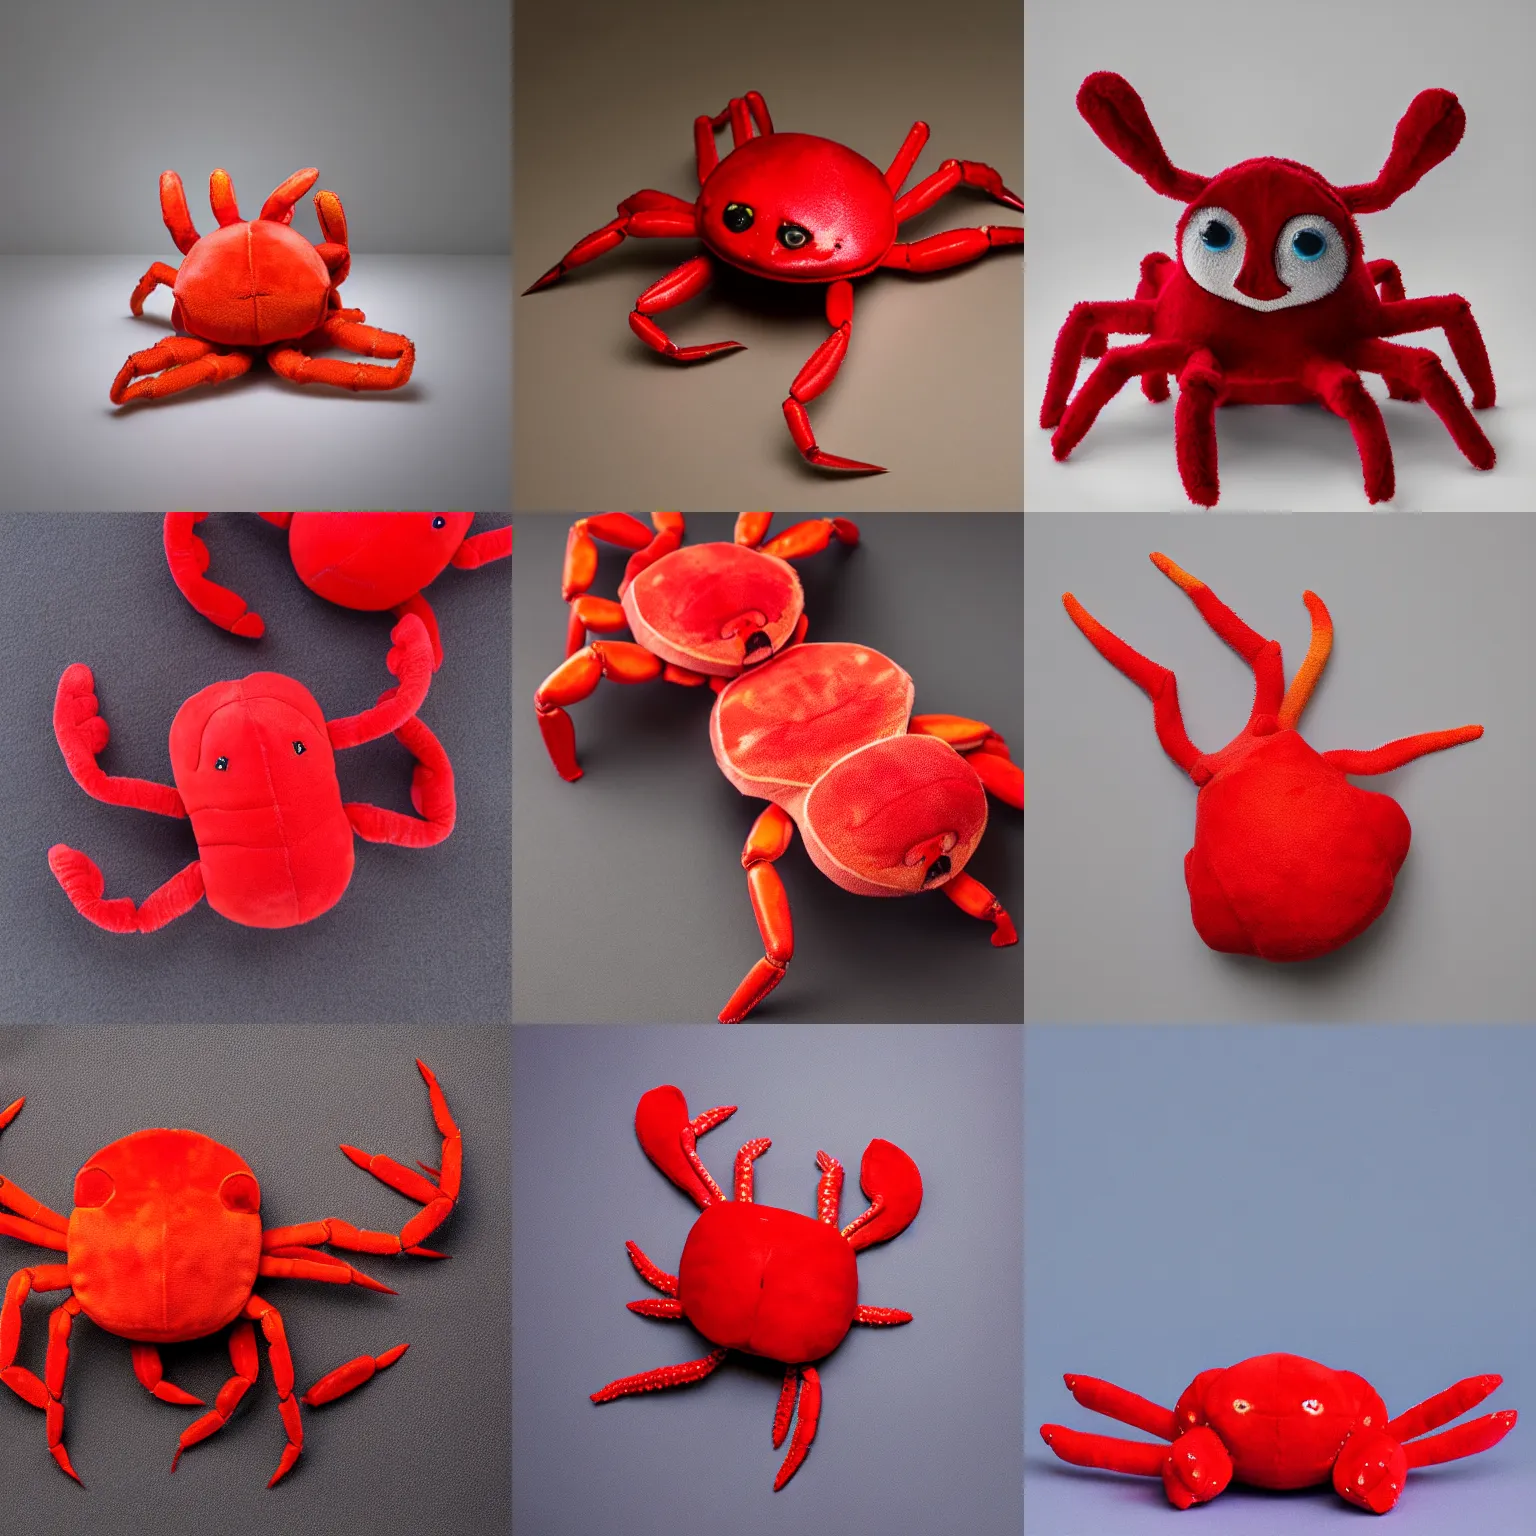 Prompt: a plushi of a red crab, studio lighting, product photo